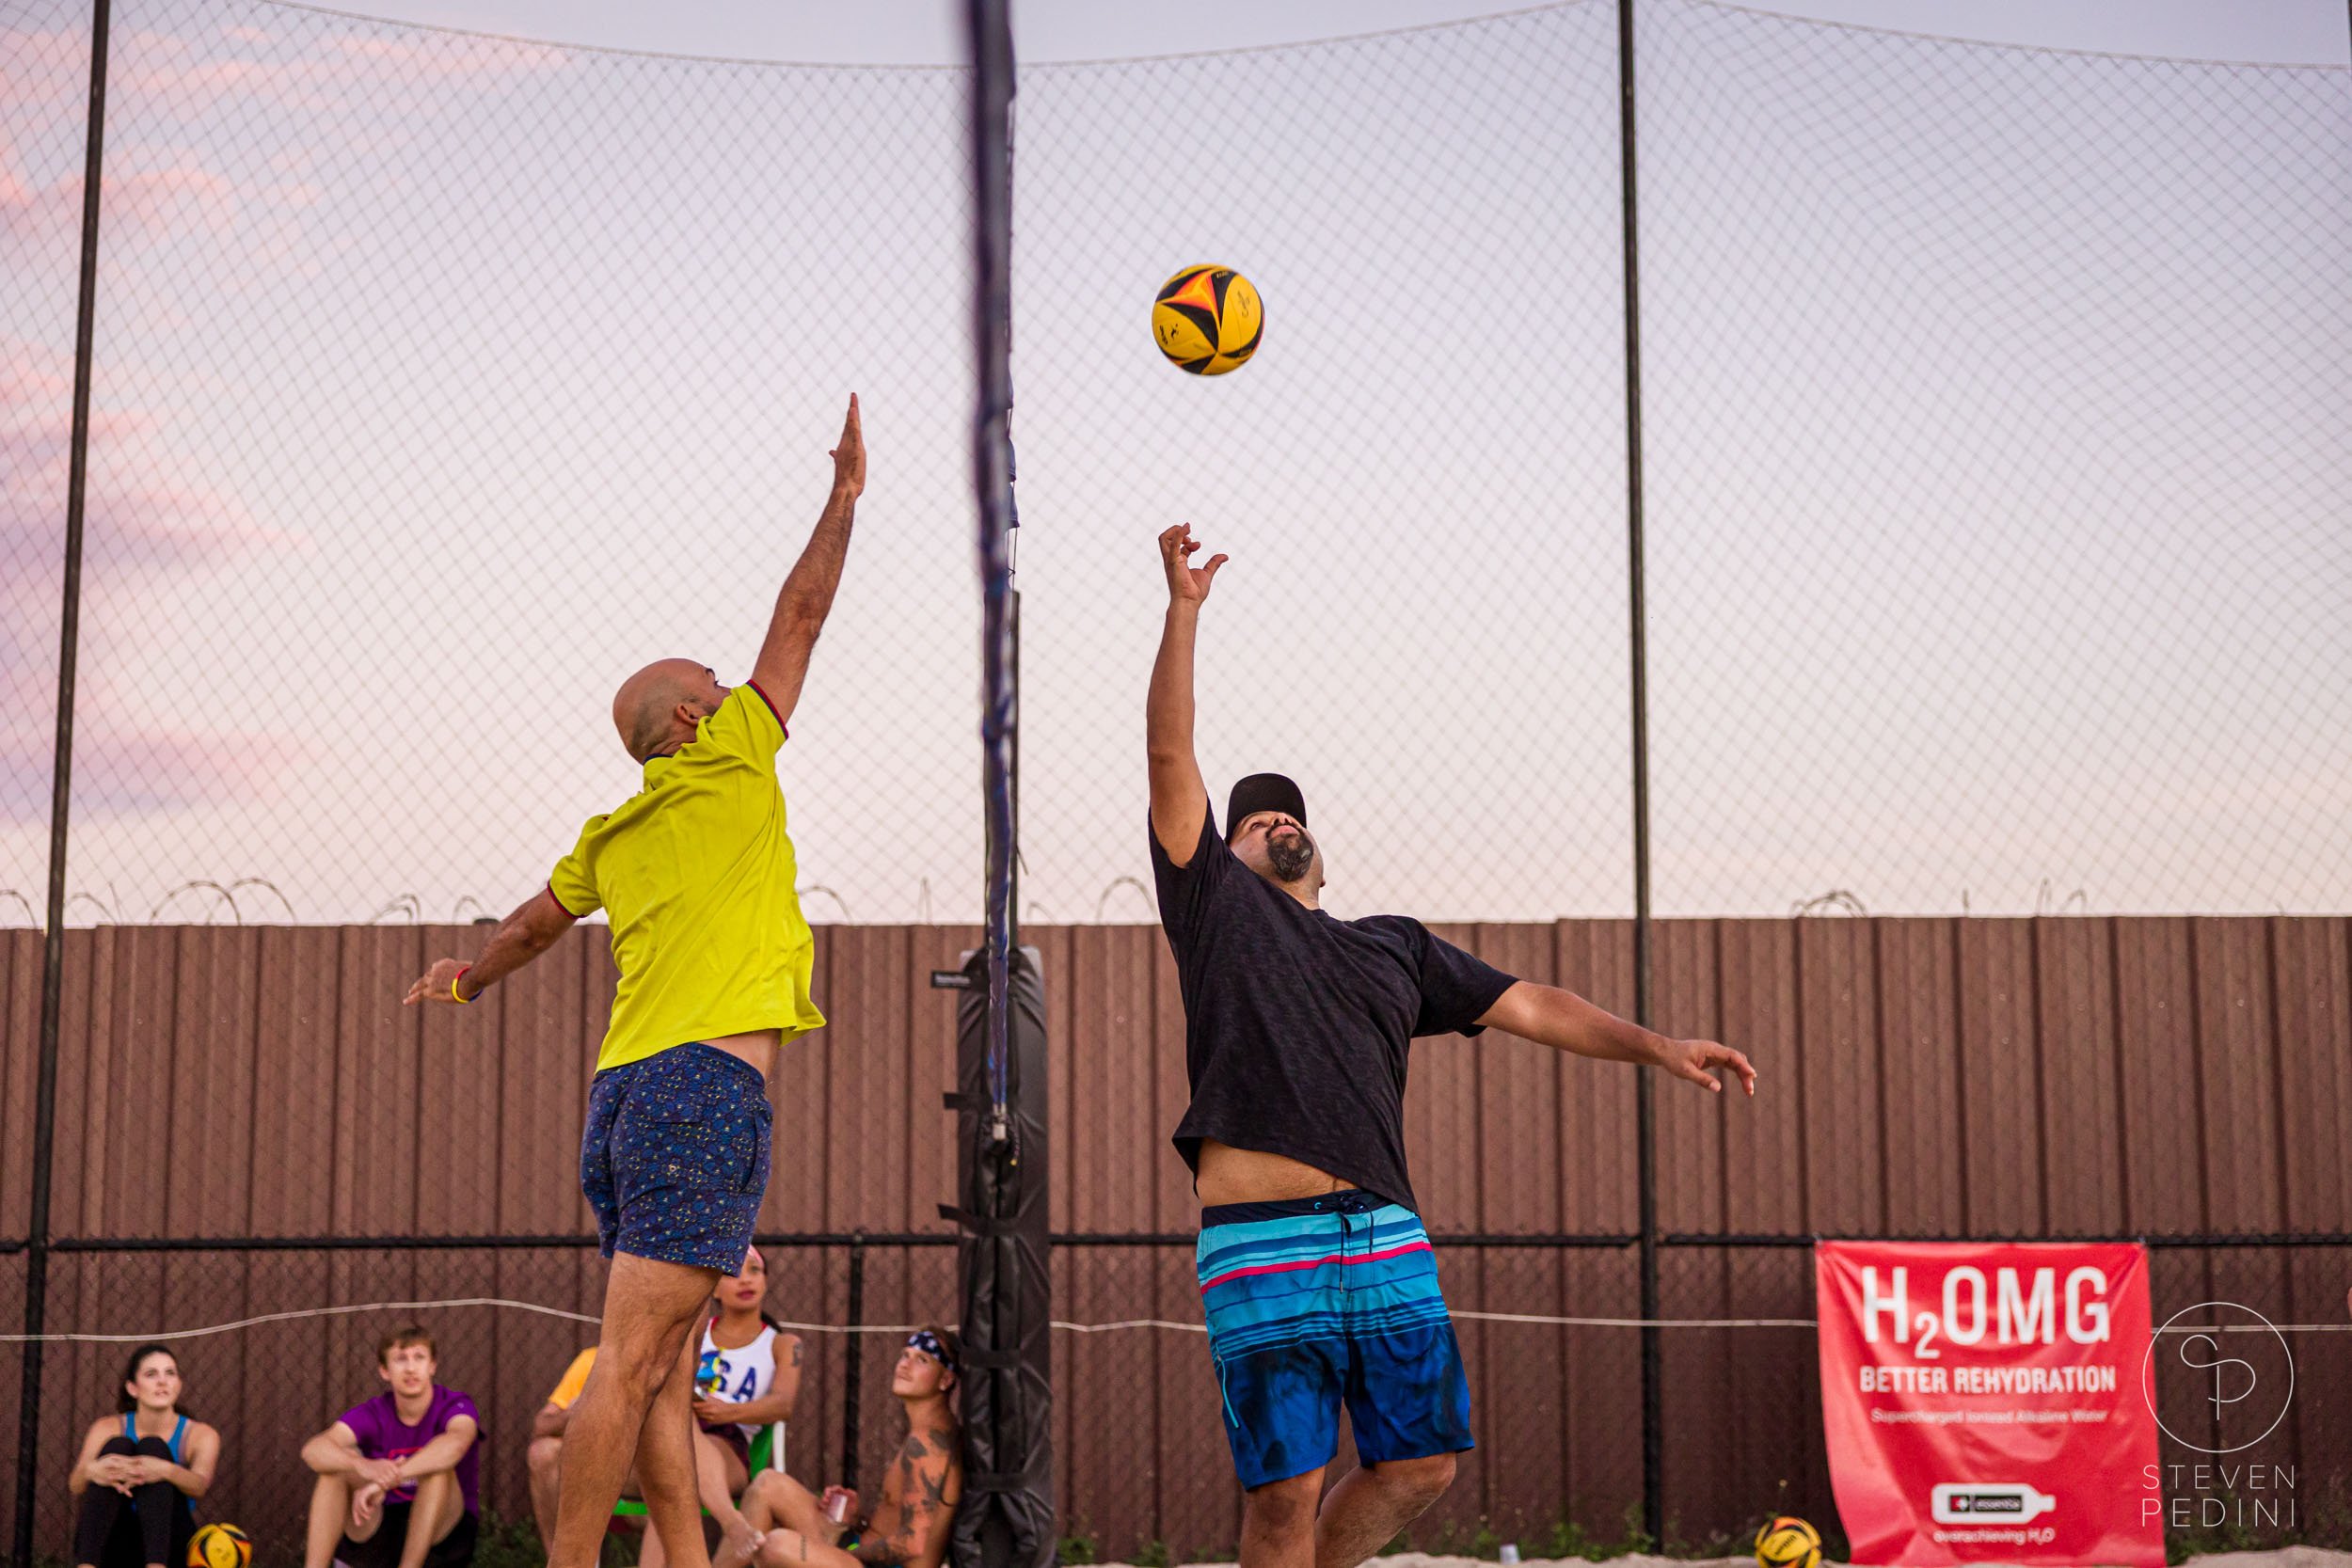 Steven Pedini Photography - Bumpy Pickle - Sand Volleyball - Houston TX - World Cup of Volleyball - 00257.jpg